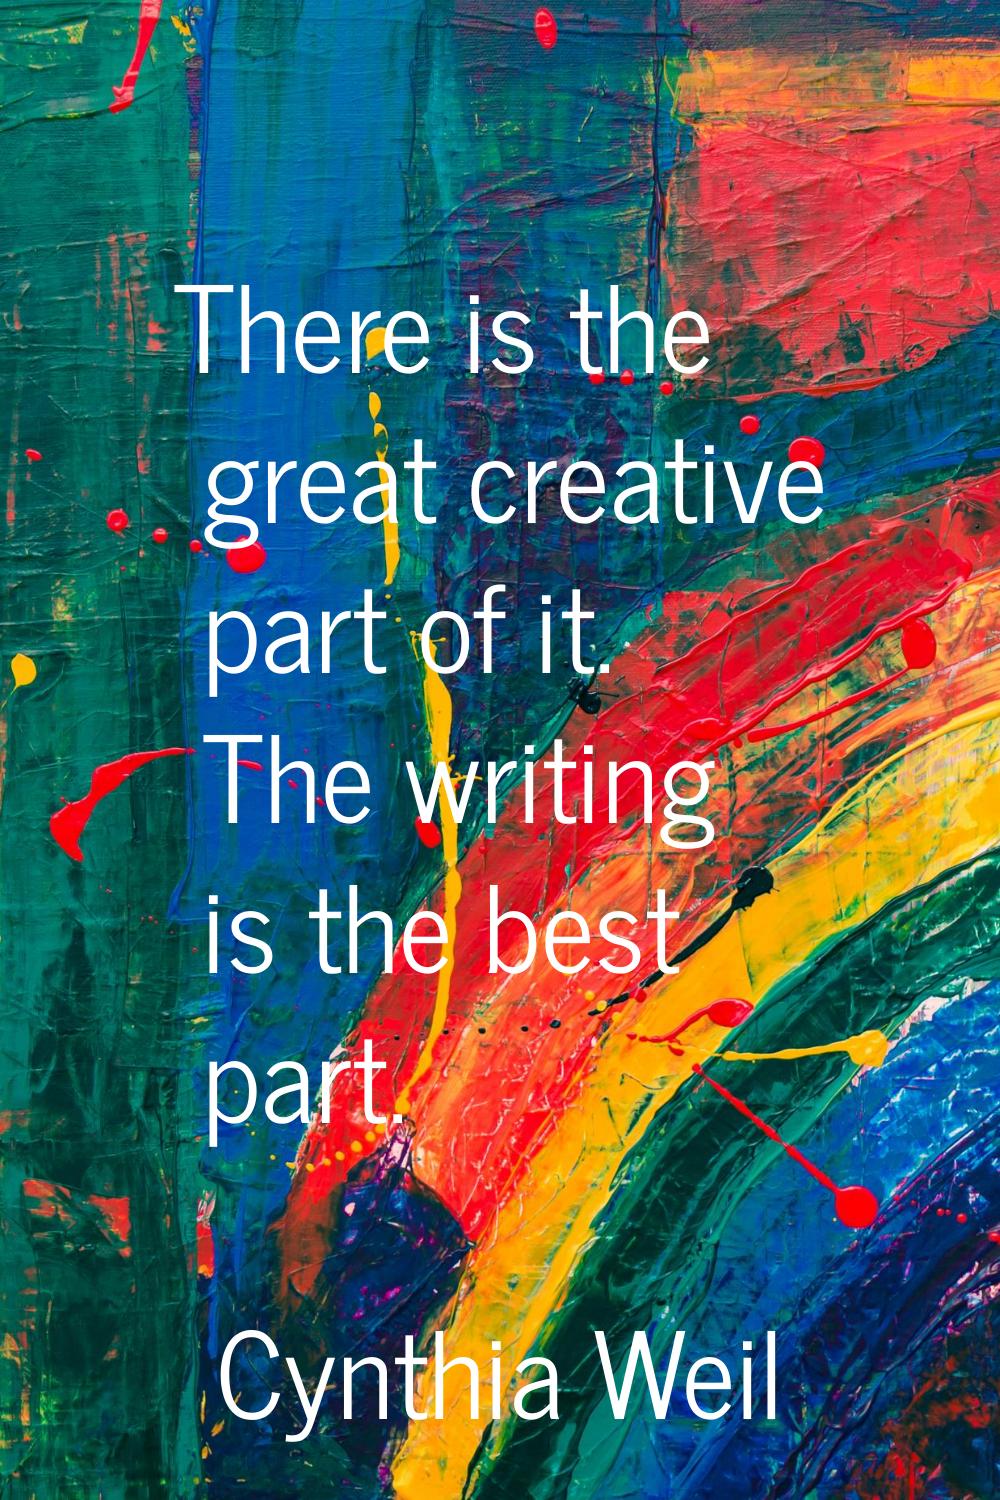 There is the great creative part of it. The writing is the best part.